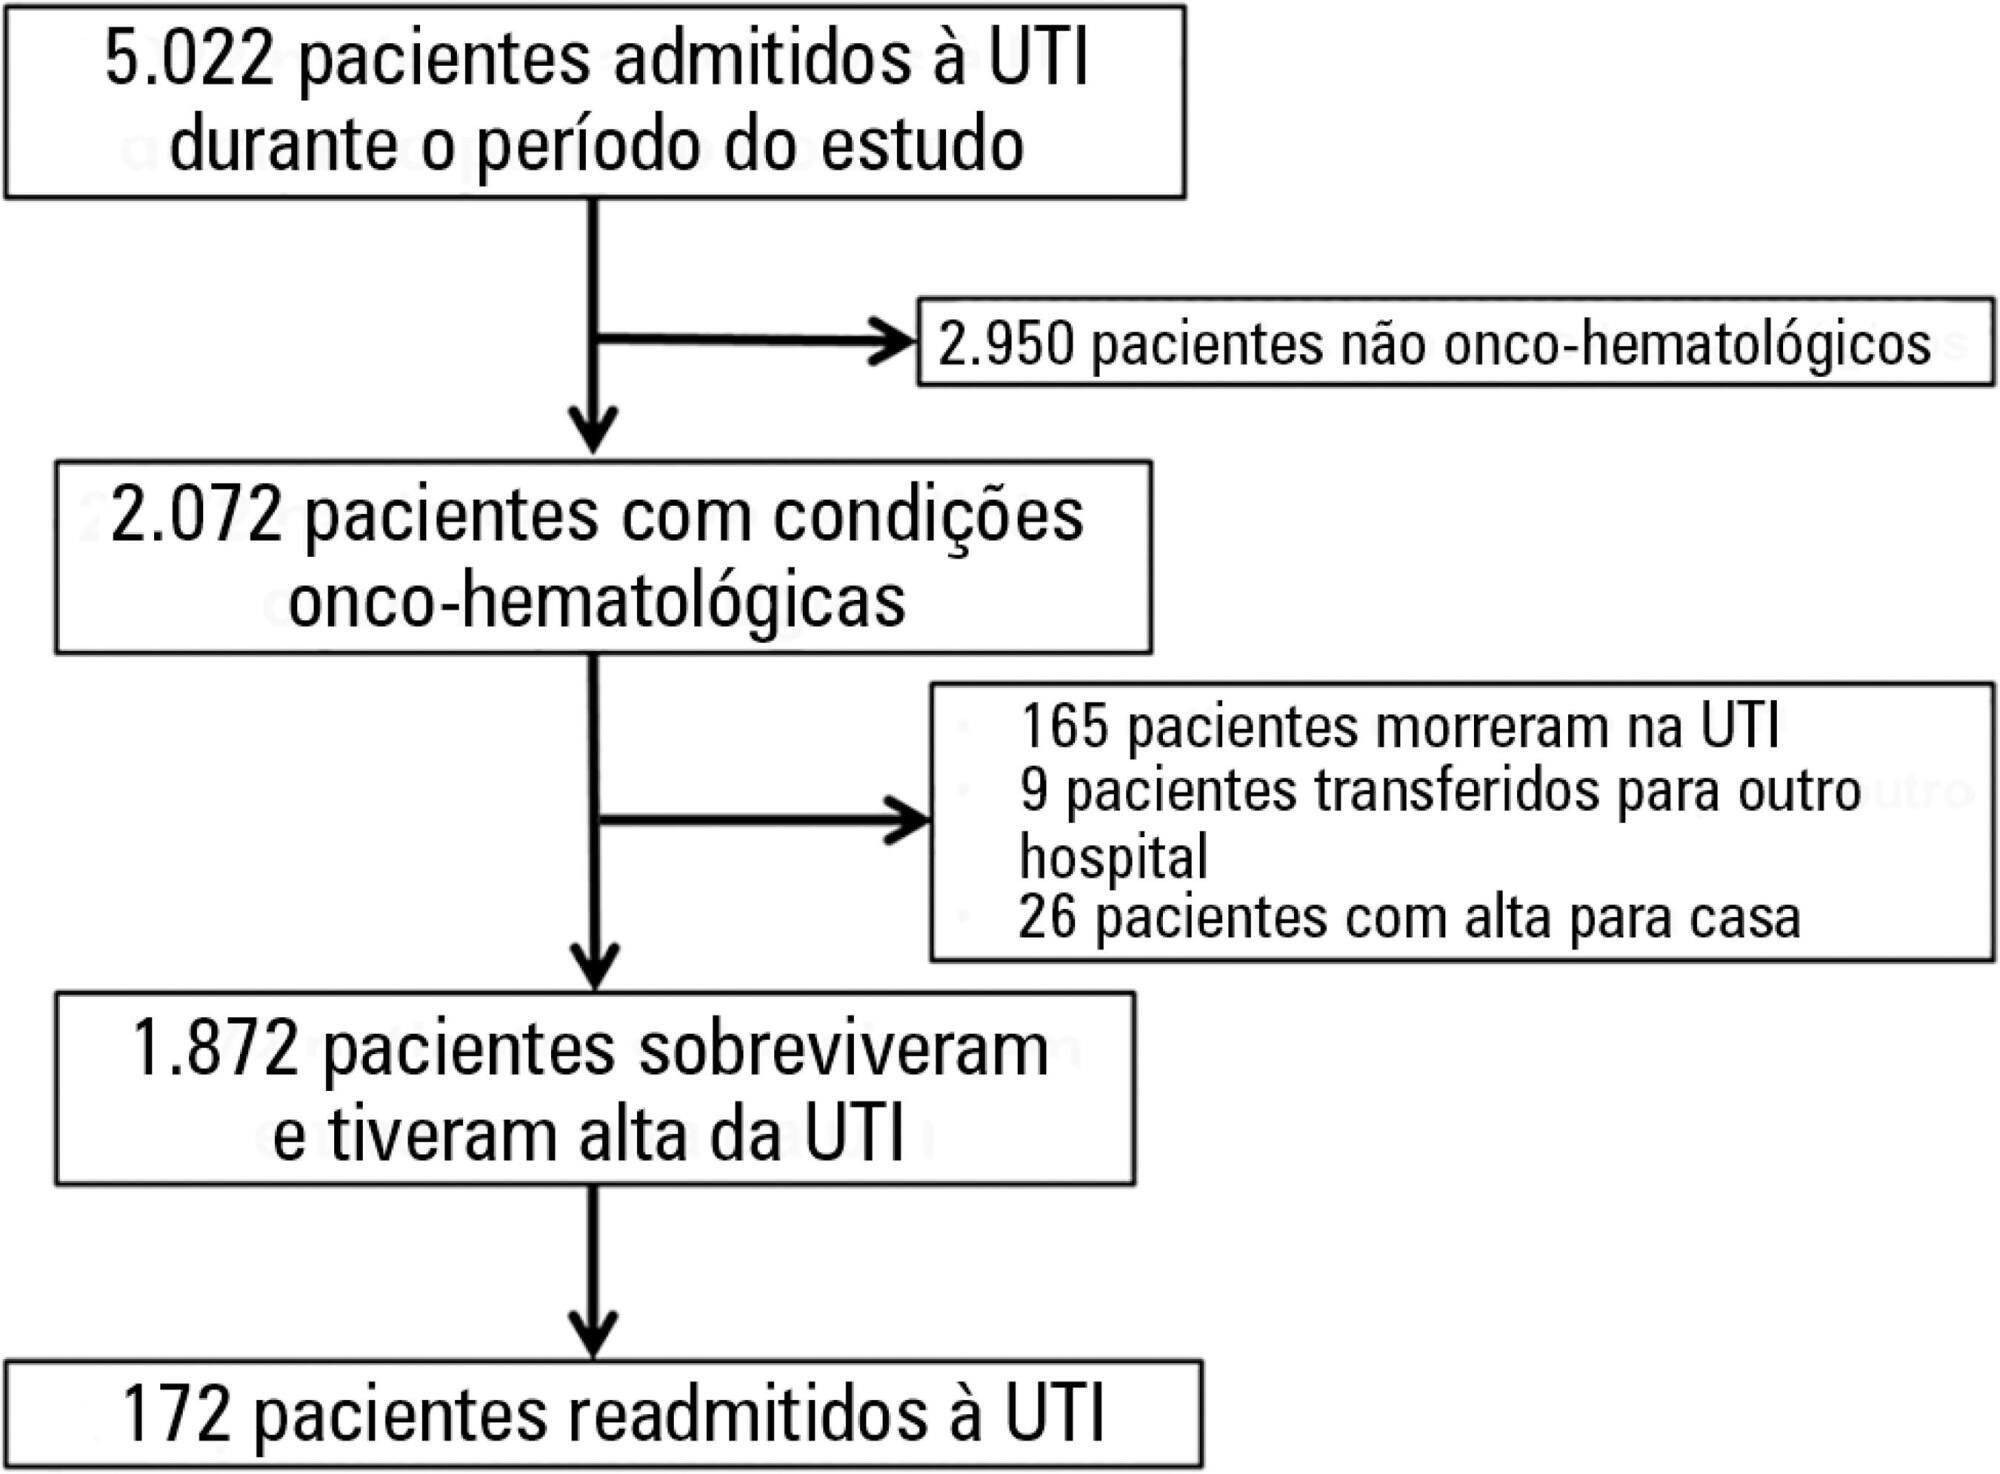 Admission factors associated with intensive care unit readmission in critically ill oncohematological patients: a retrospective cohort study